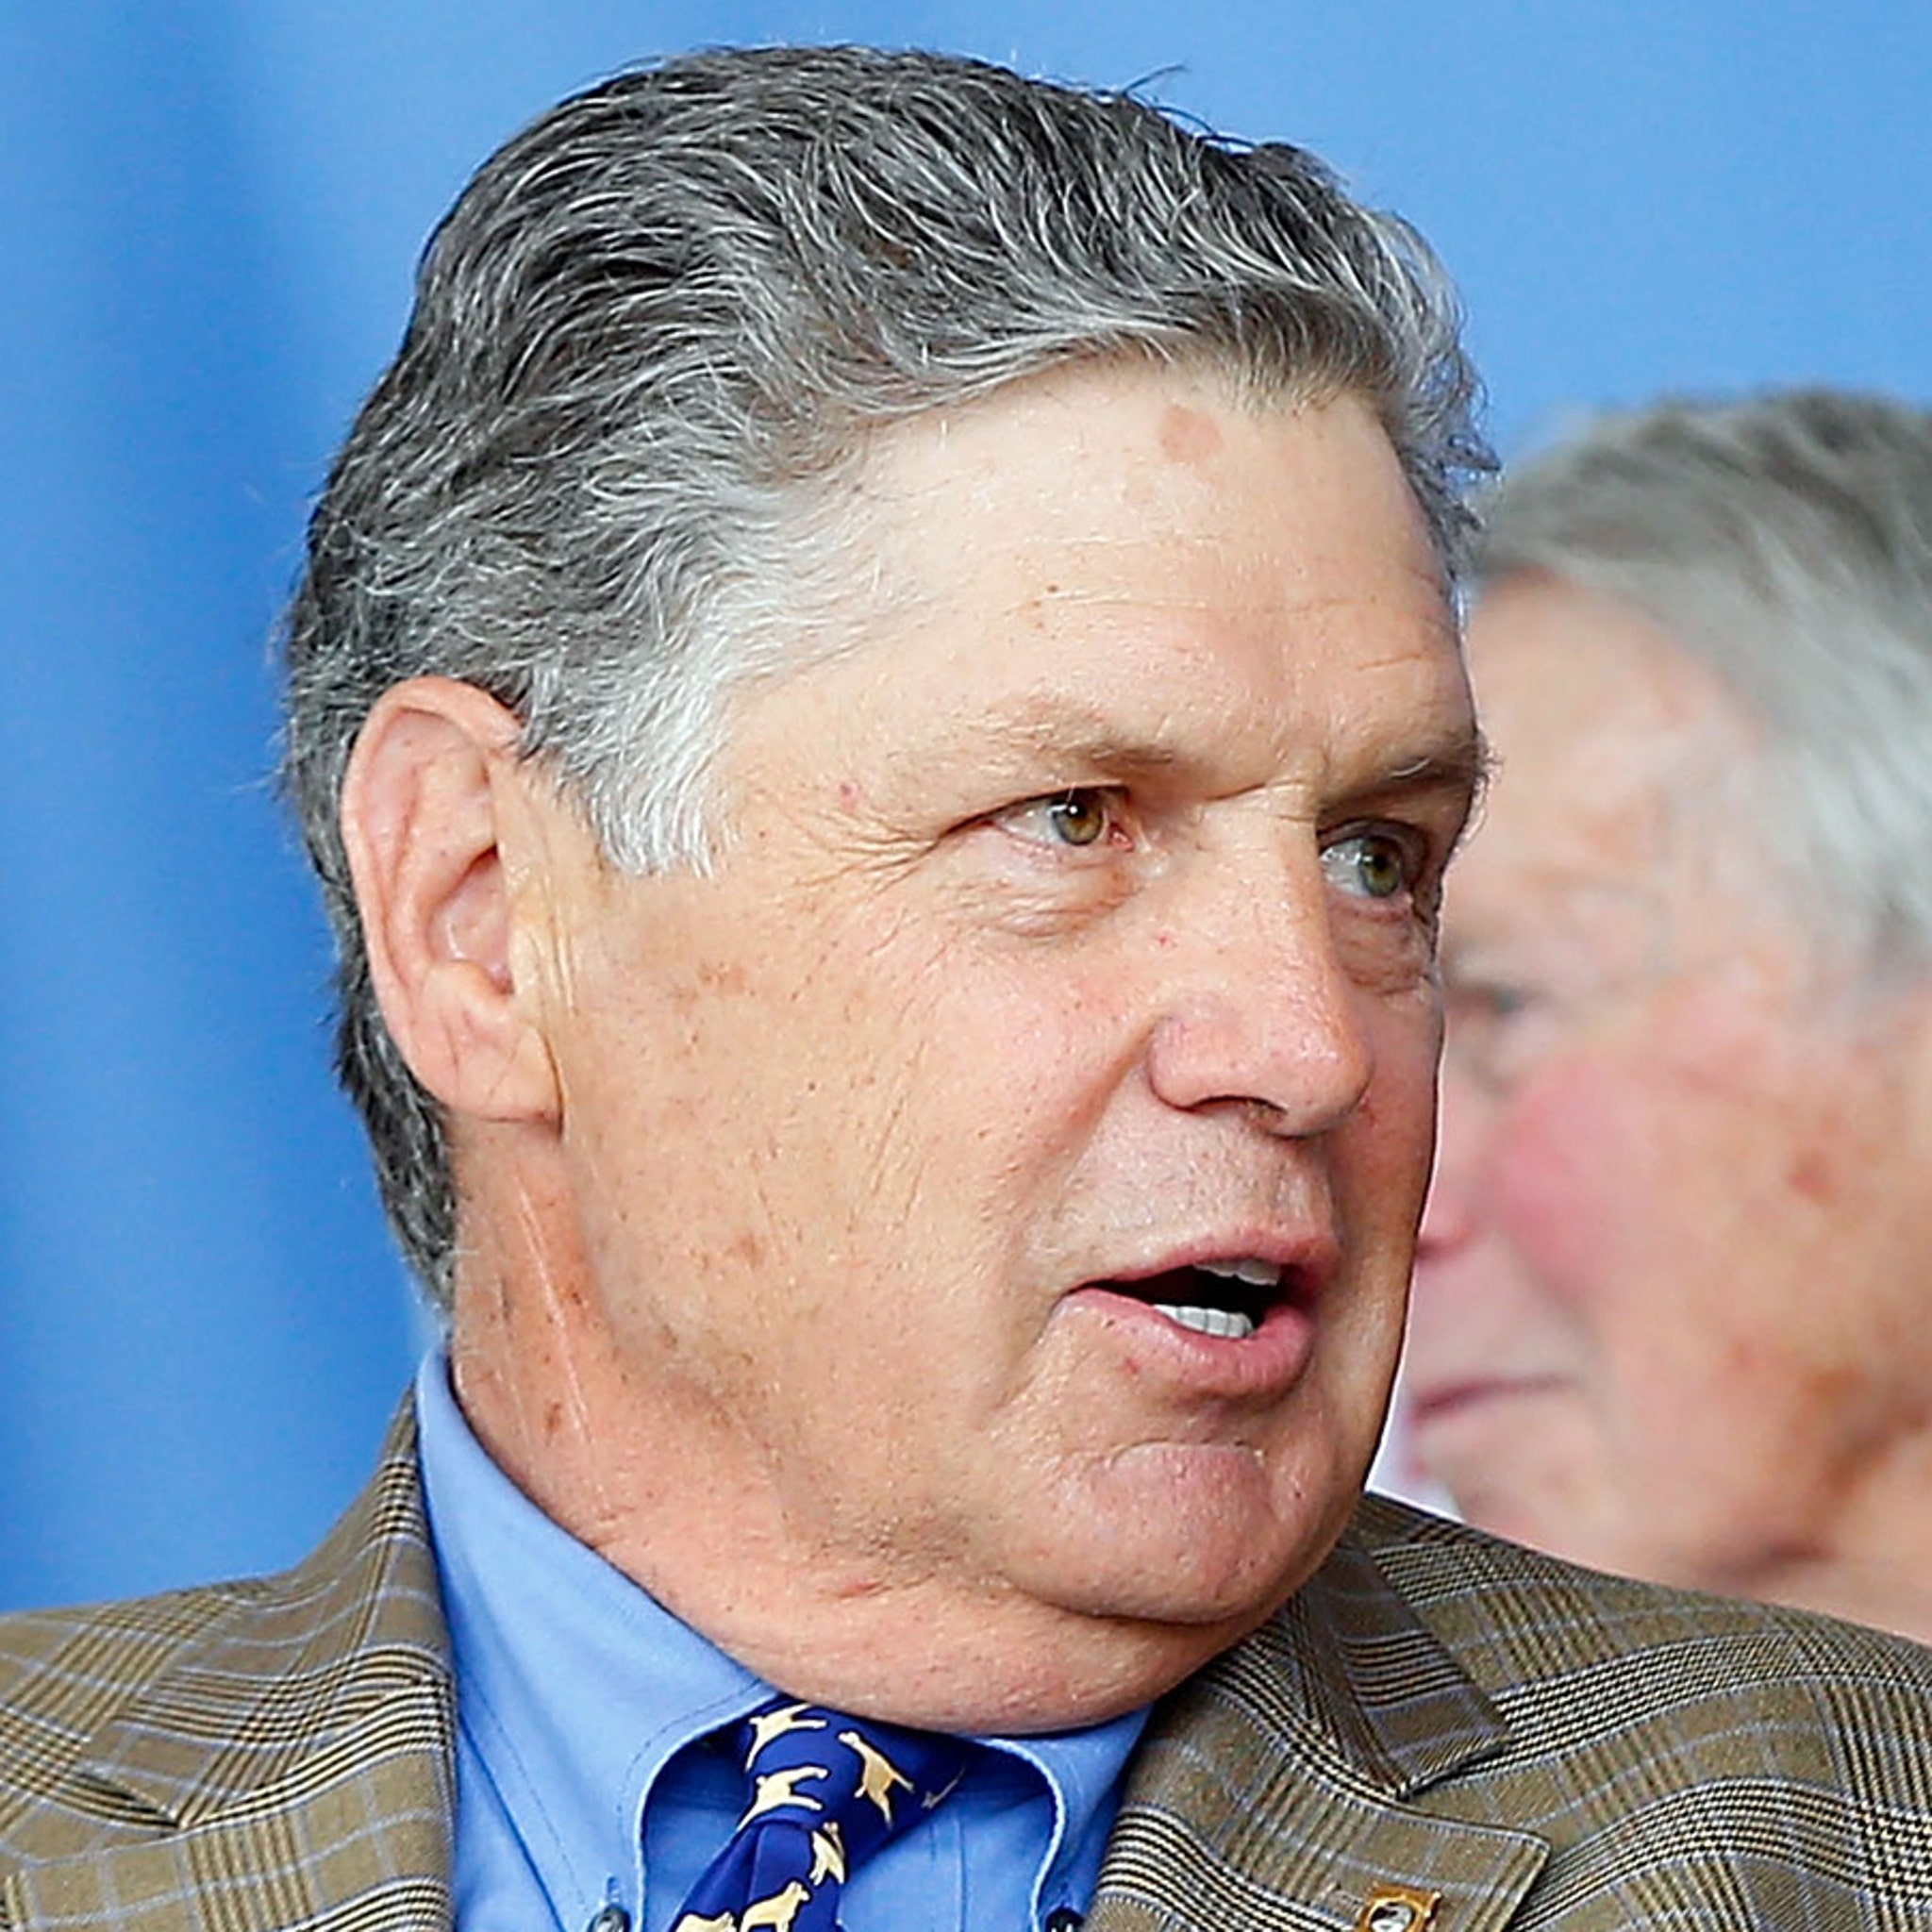 Mets legend Tom Seaver dies at 75 after battle with dementia